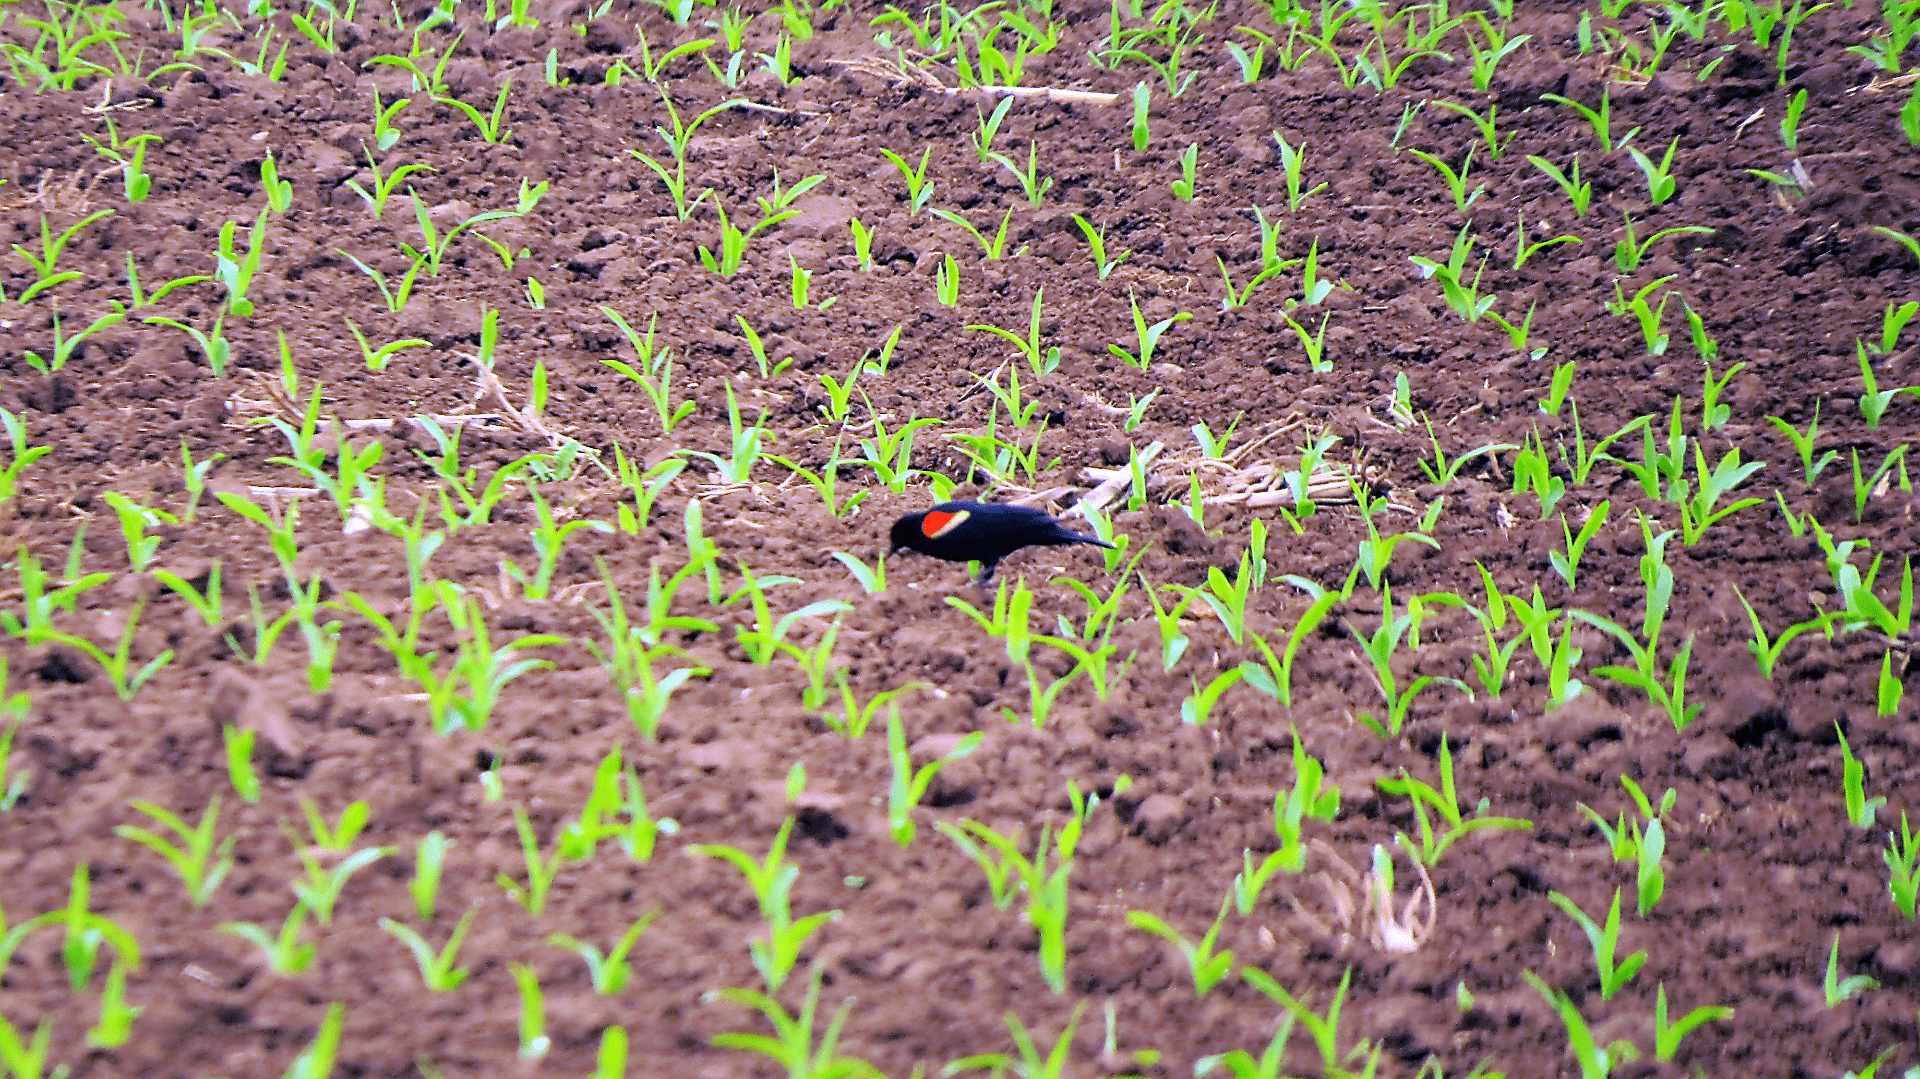 Photo shows a red-wing blackbird in field of newly sprouted corn plants.